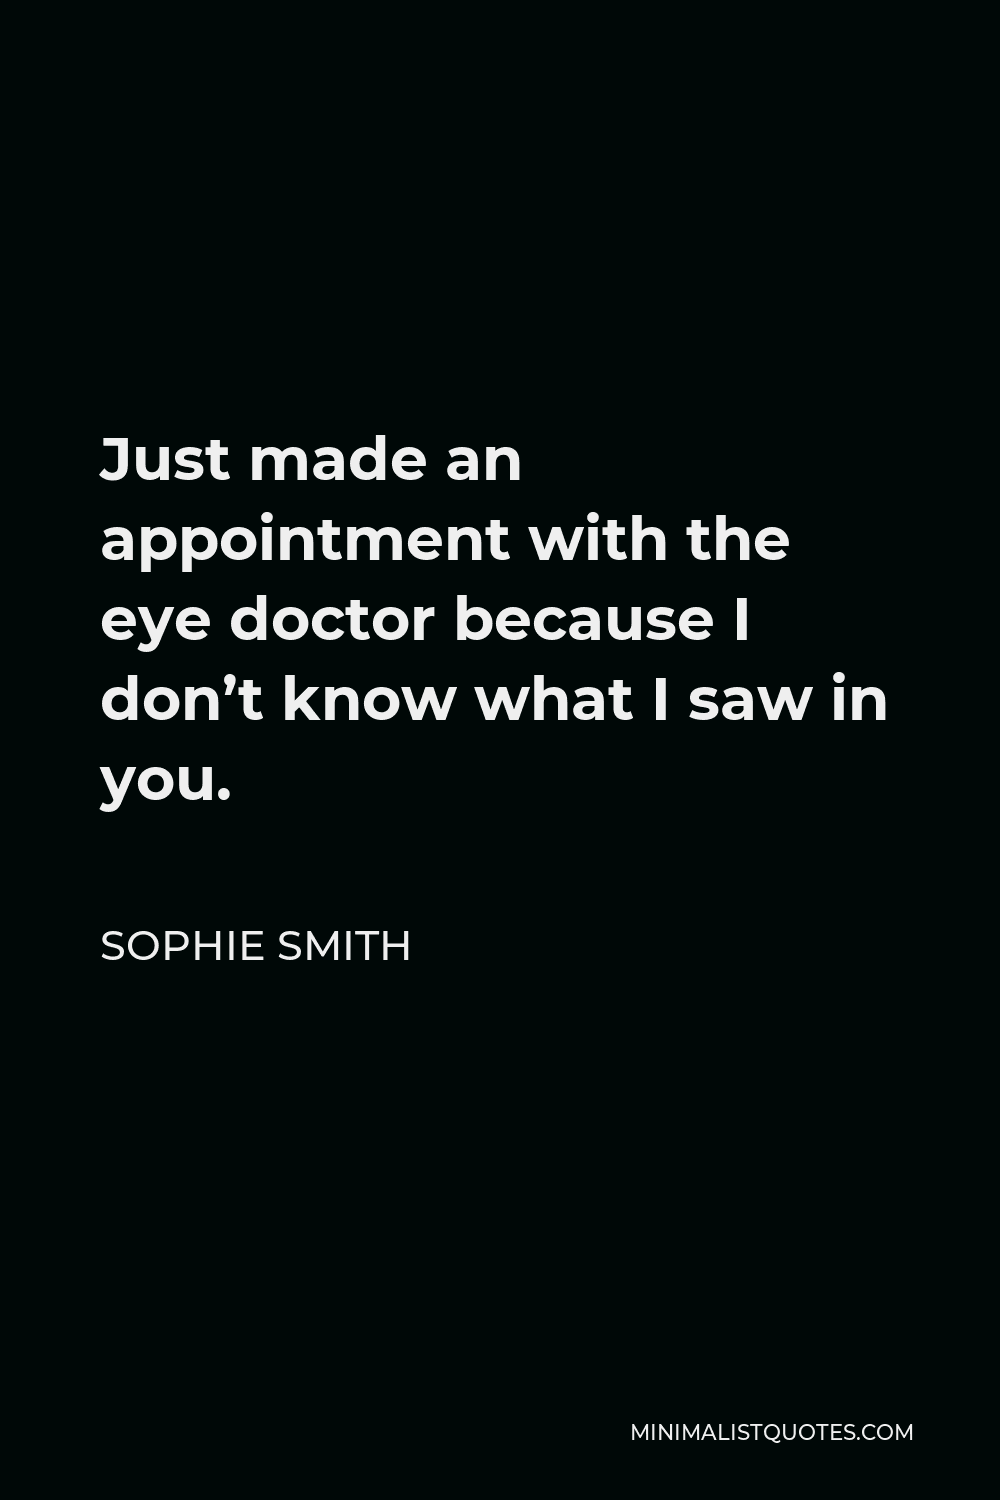 Sophie Smith Quote - Just made an appointment with the eye doctor because I don’t know what I saw in you.